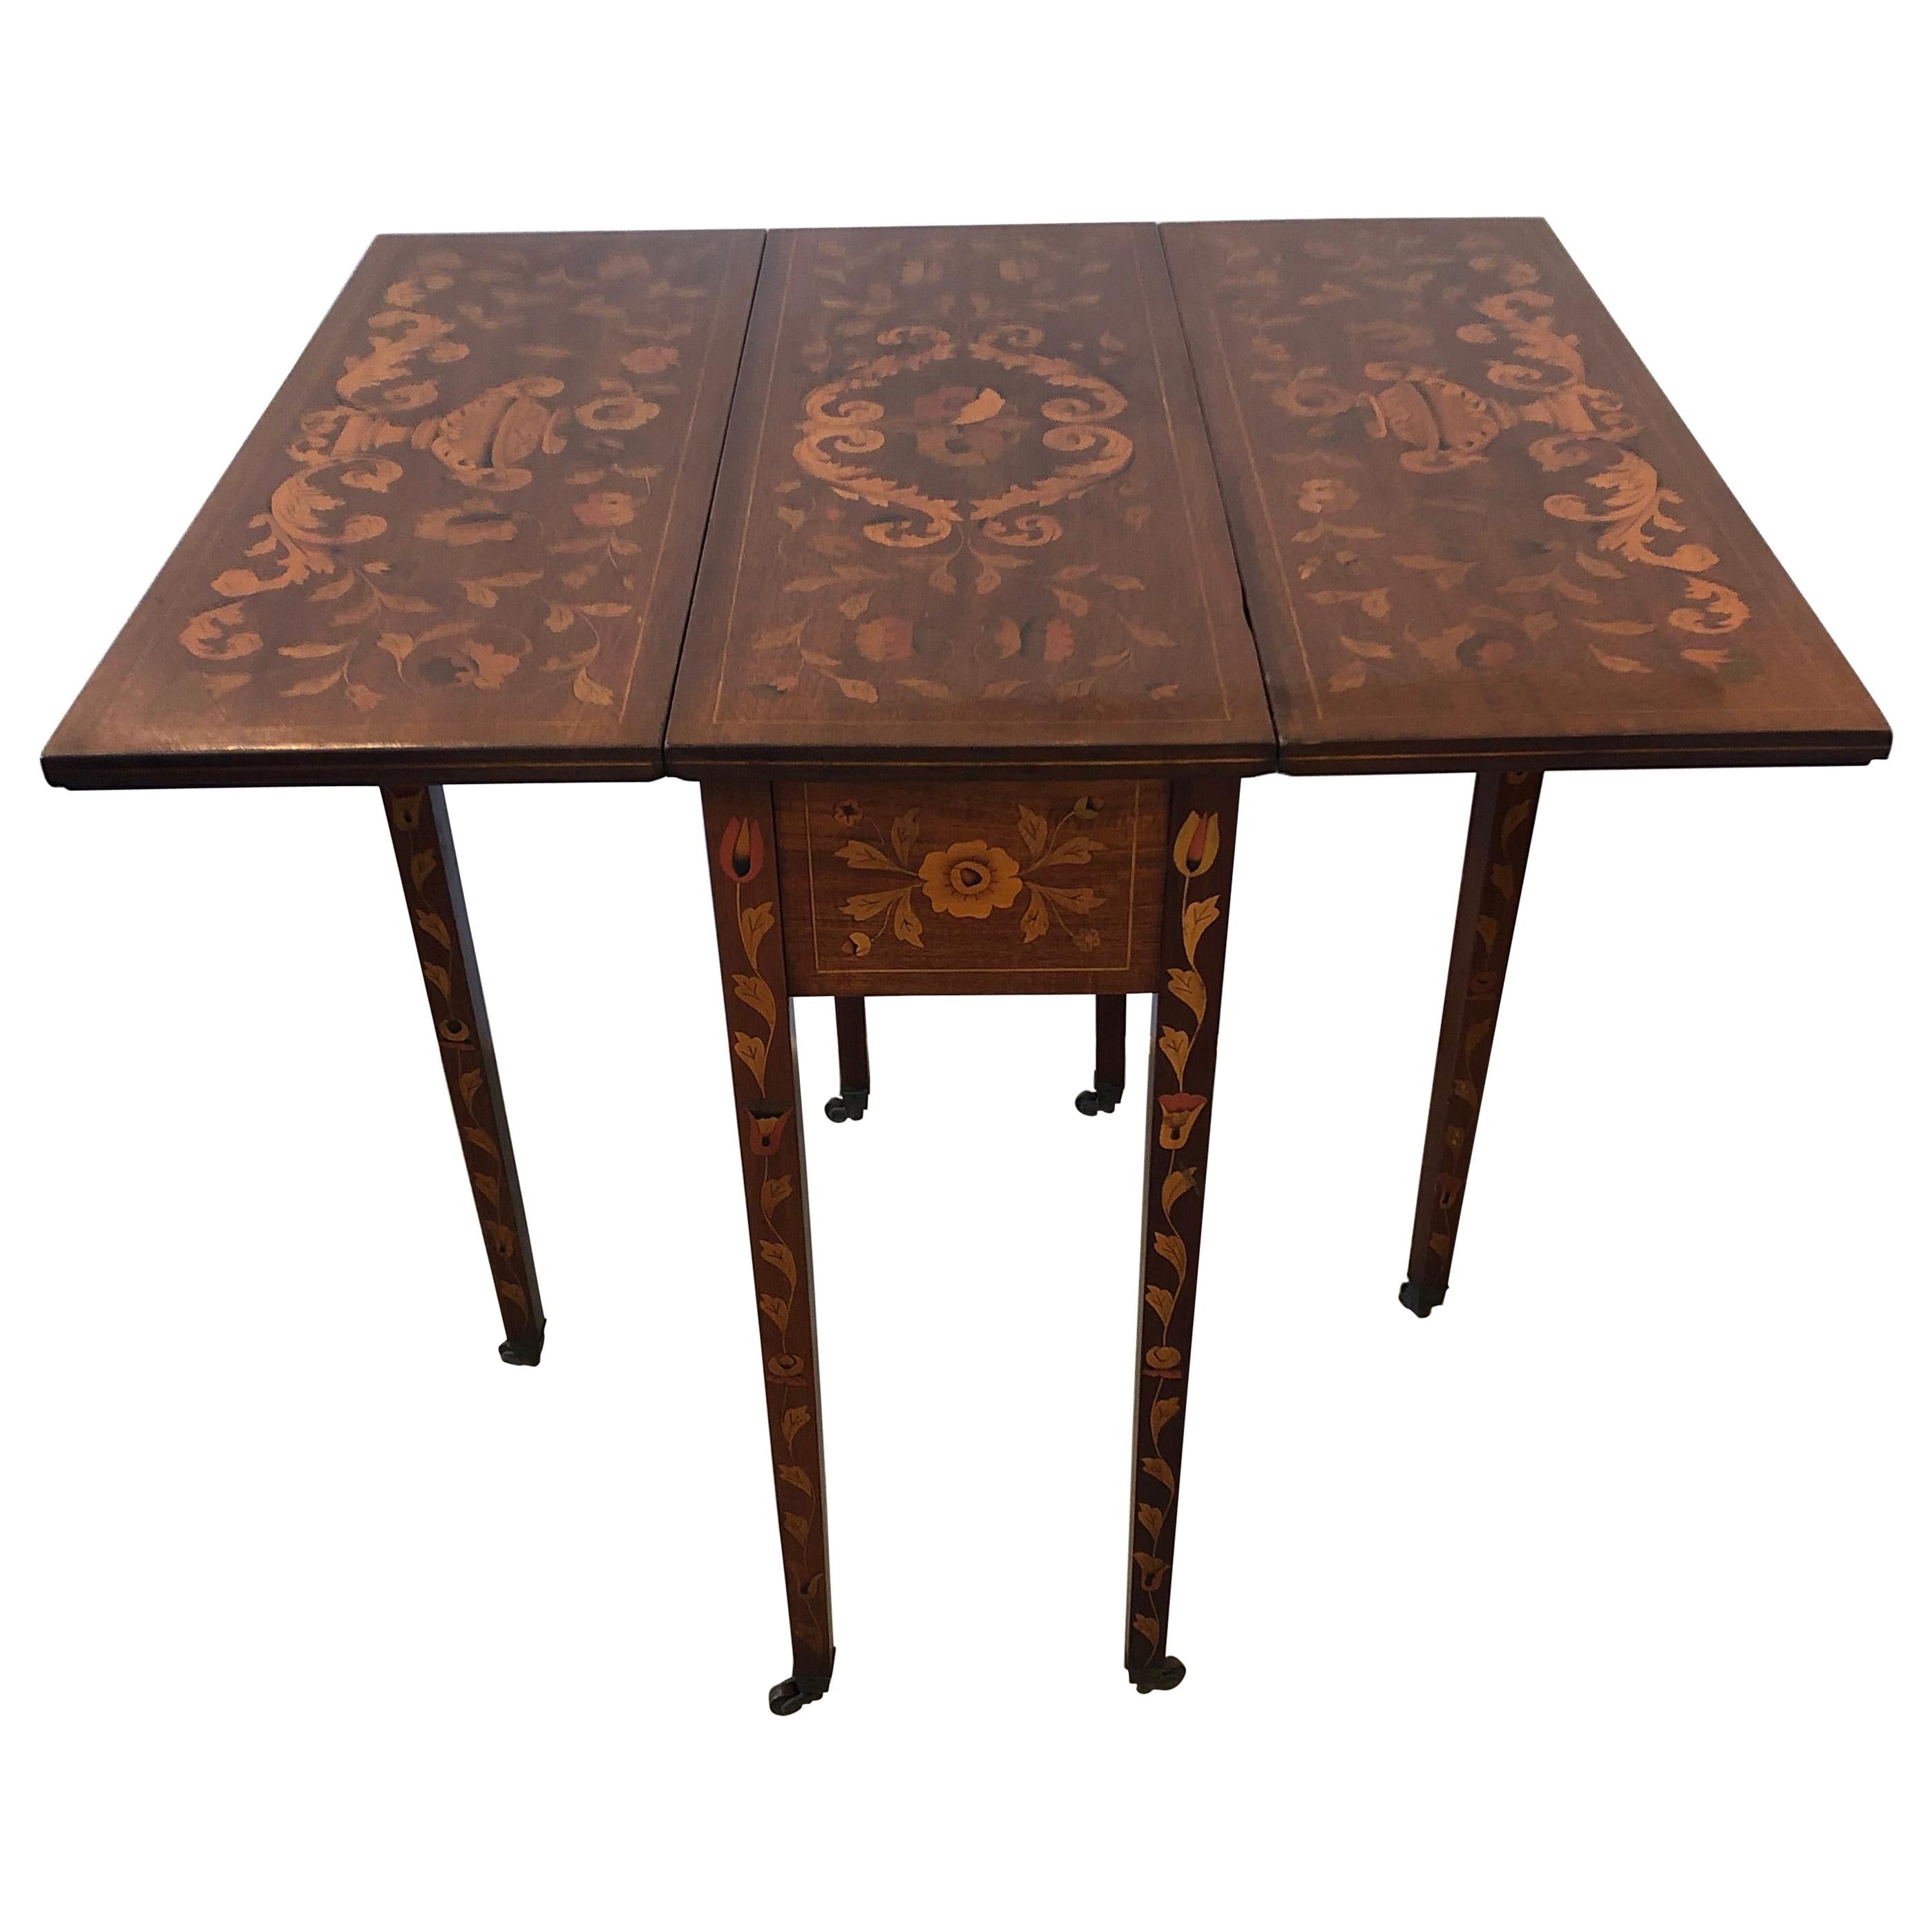 A magnificent 19th century drop-leaf side table from the Netherlands having incredible Dutch marquetry inlay work including leaves, flowers, and urns in mahogany, satinwood, cherry and ebony woods. There is one dovetailed drawer and brass casters on